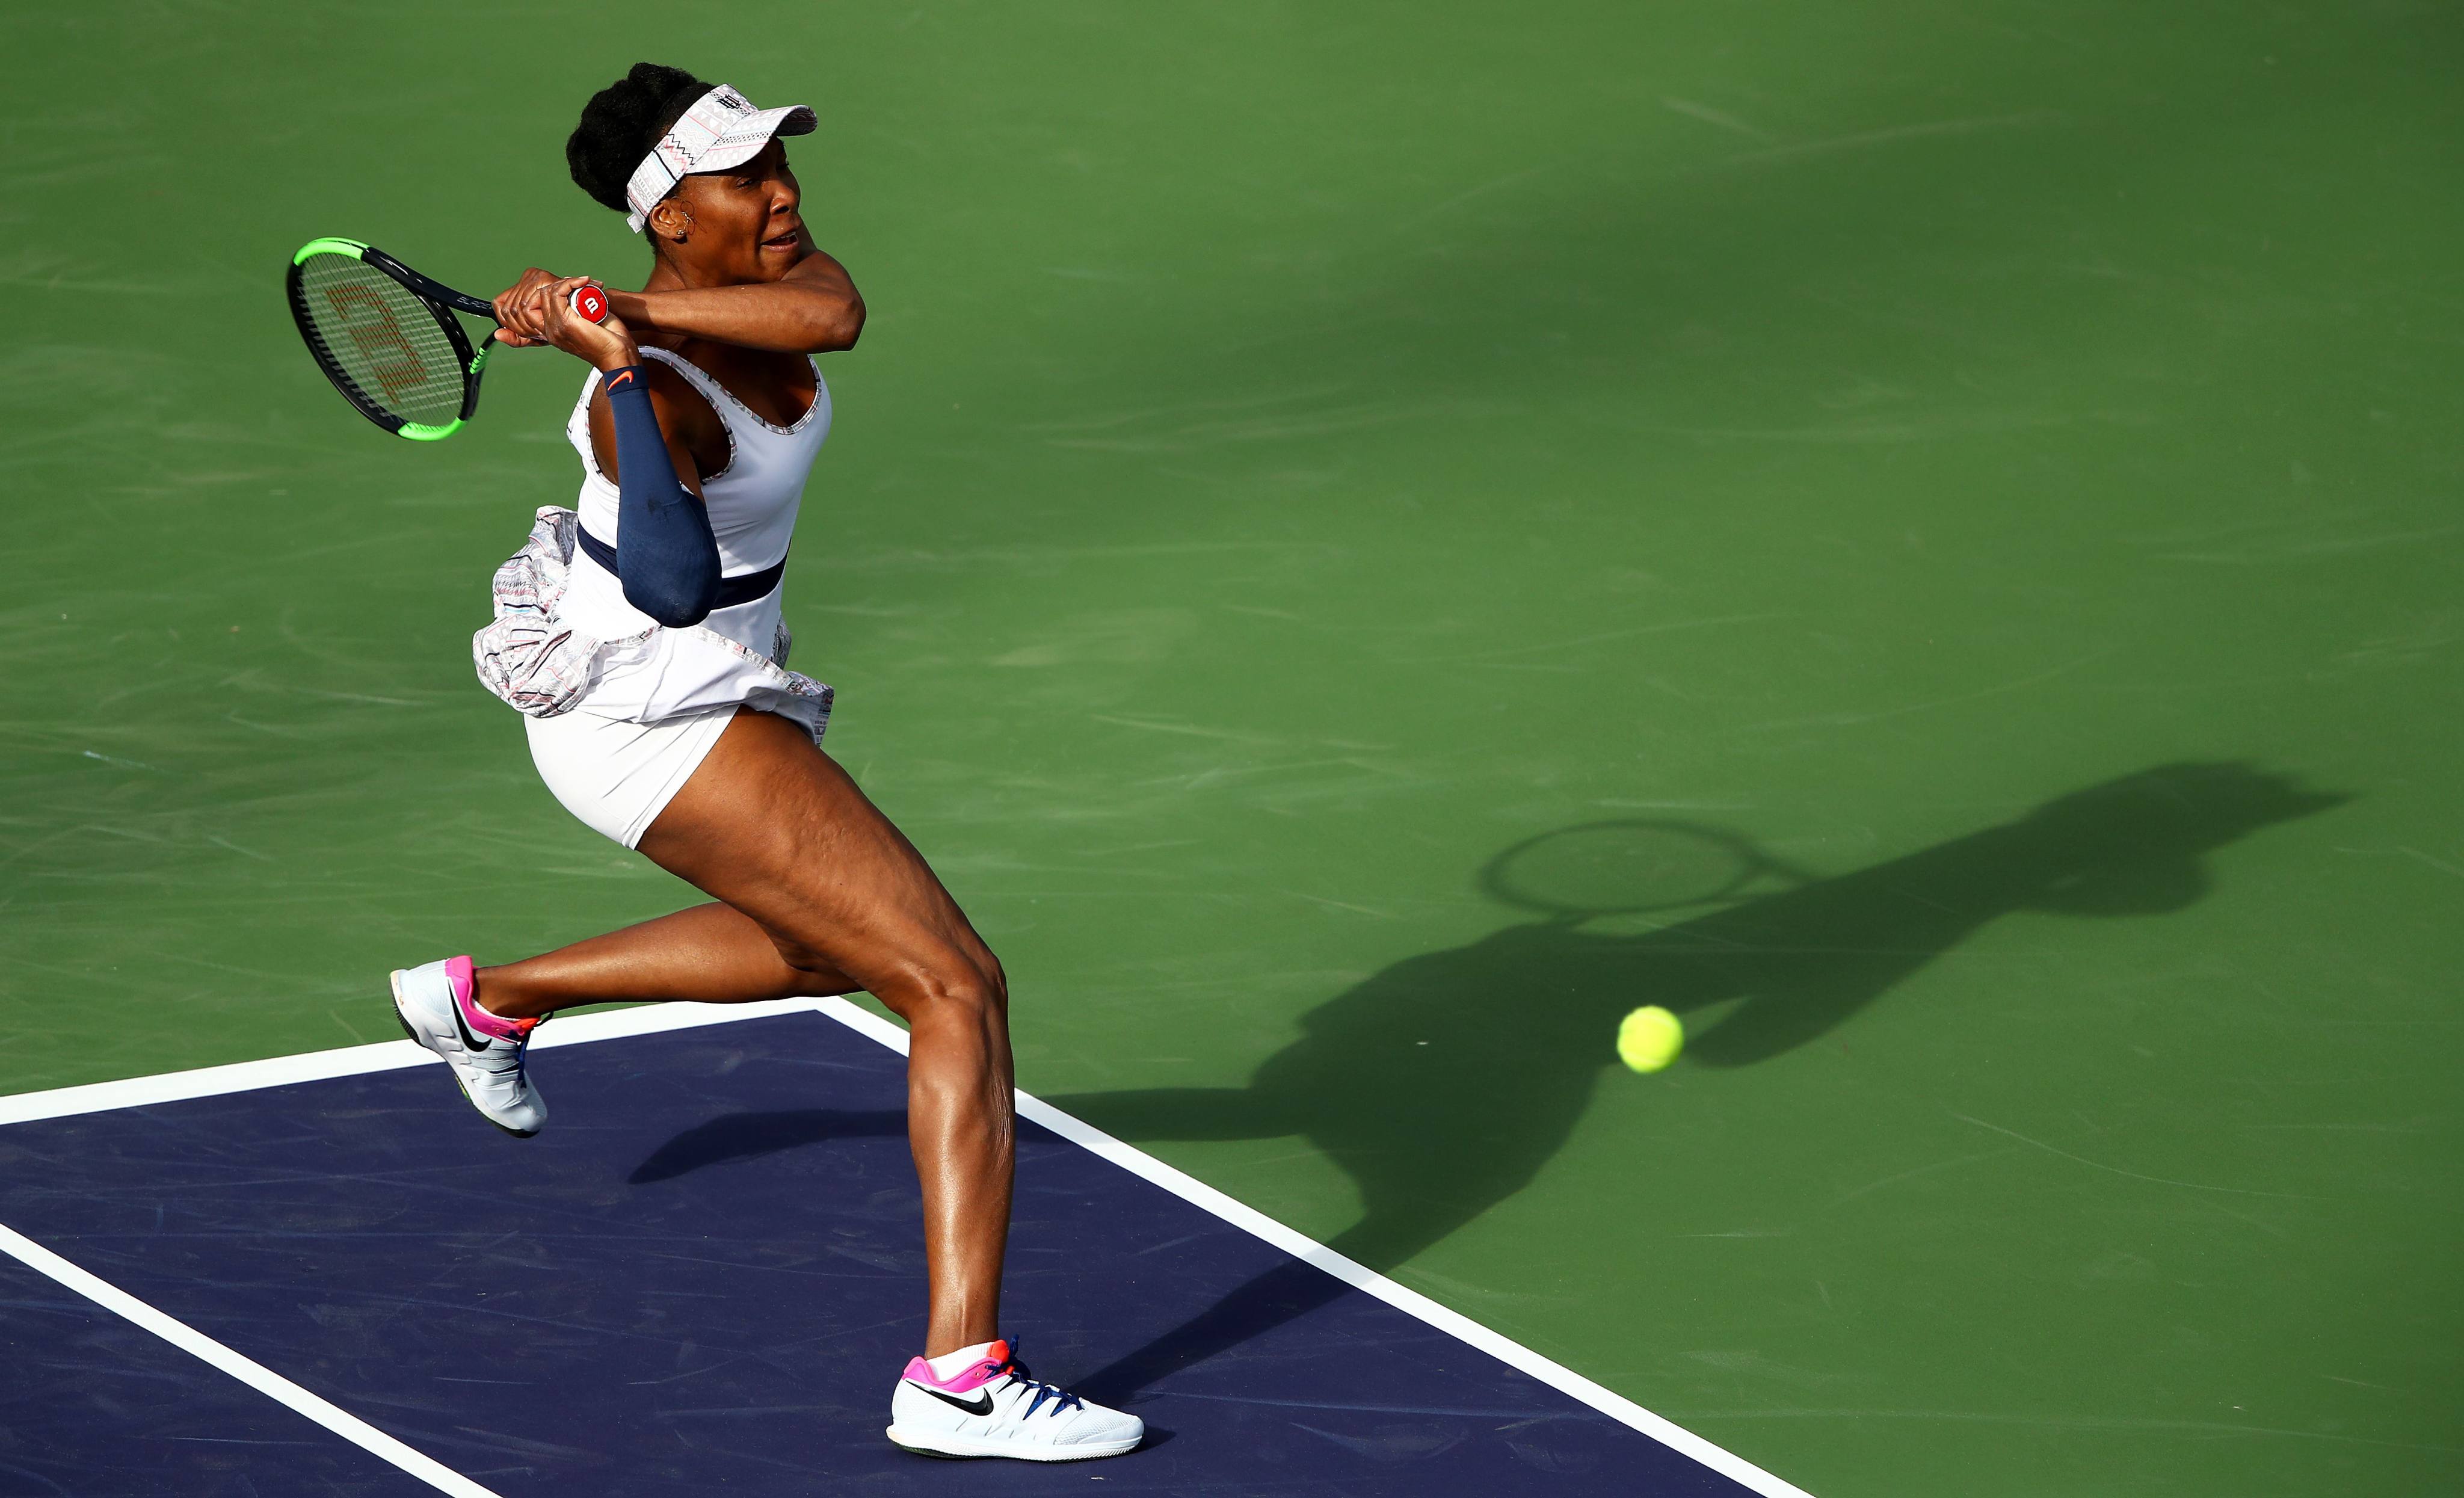 Venus Williams will play at the Australian Open 25 years after making her debut. Photo: AFP